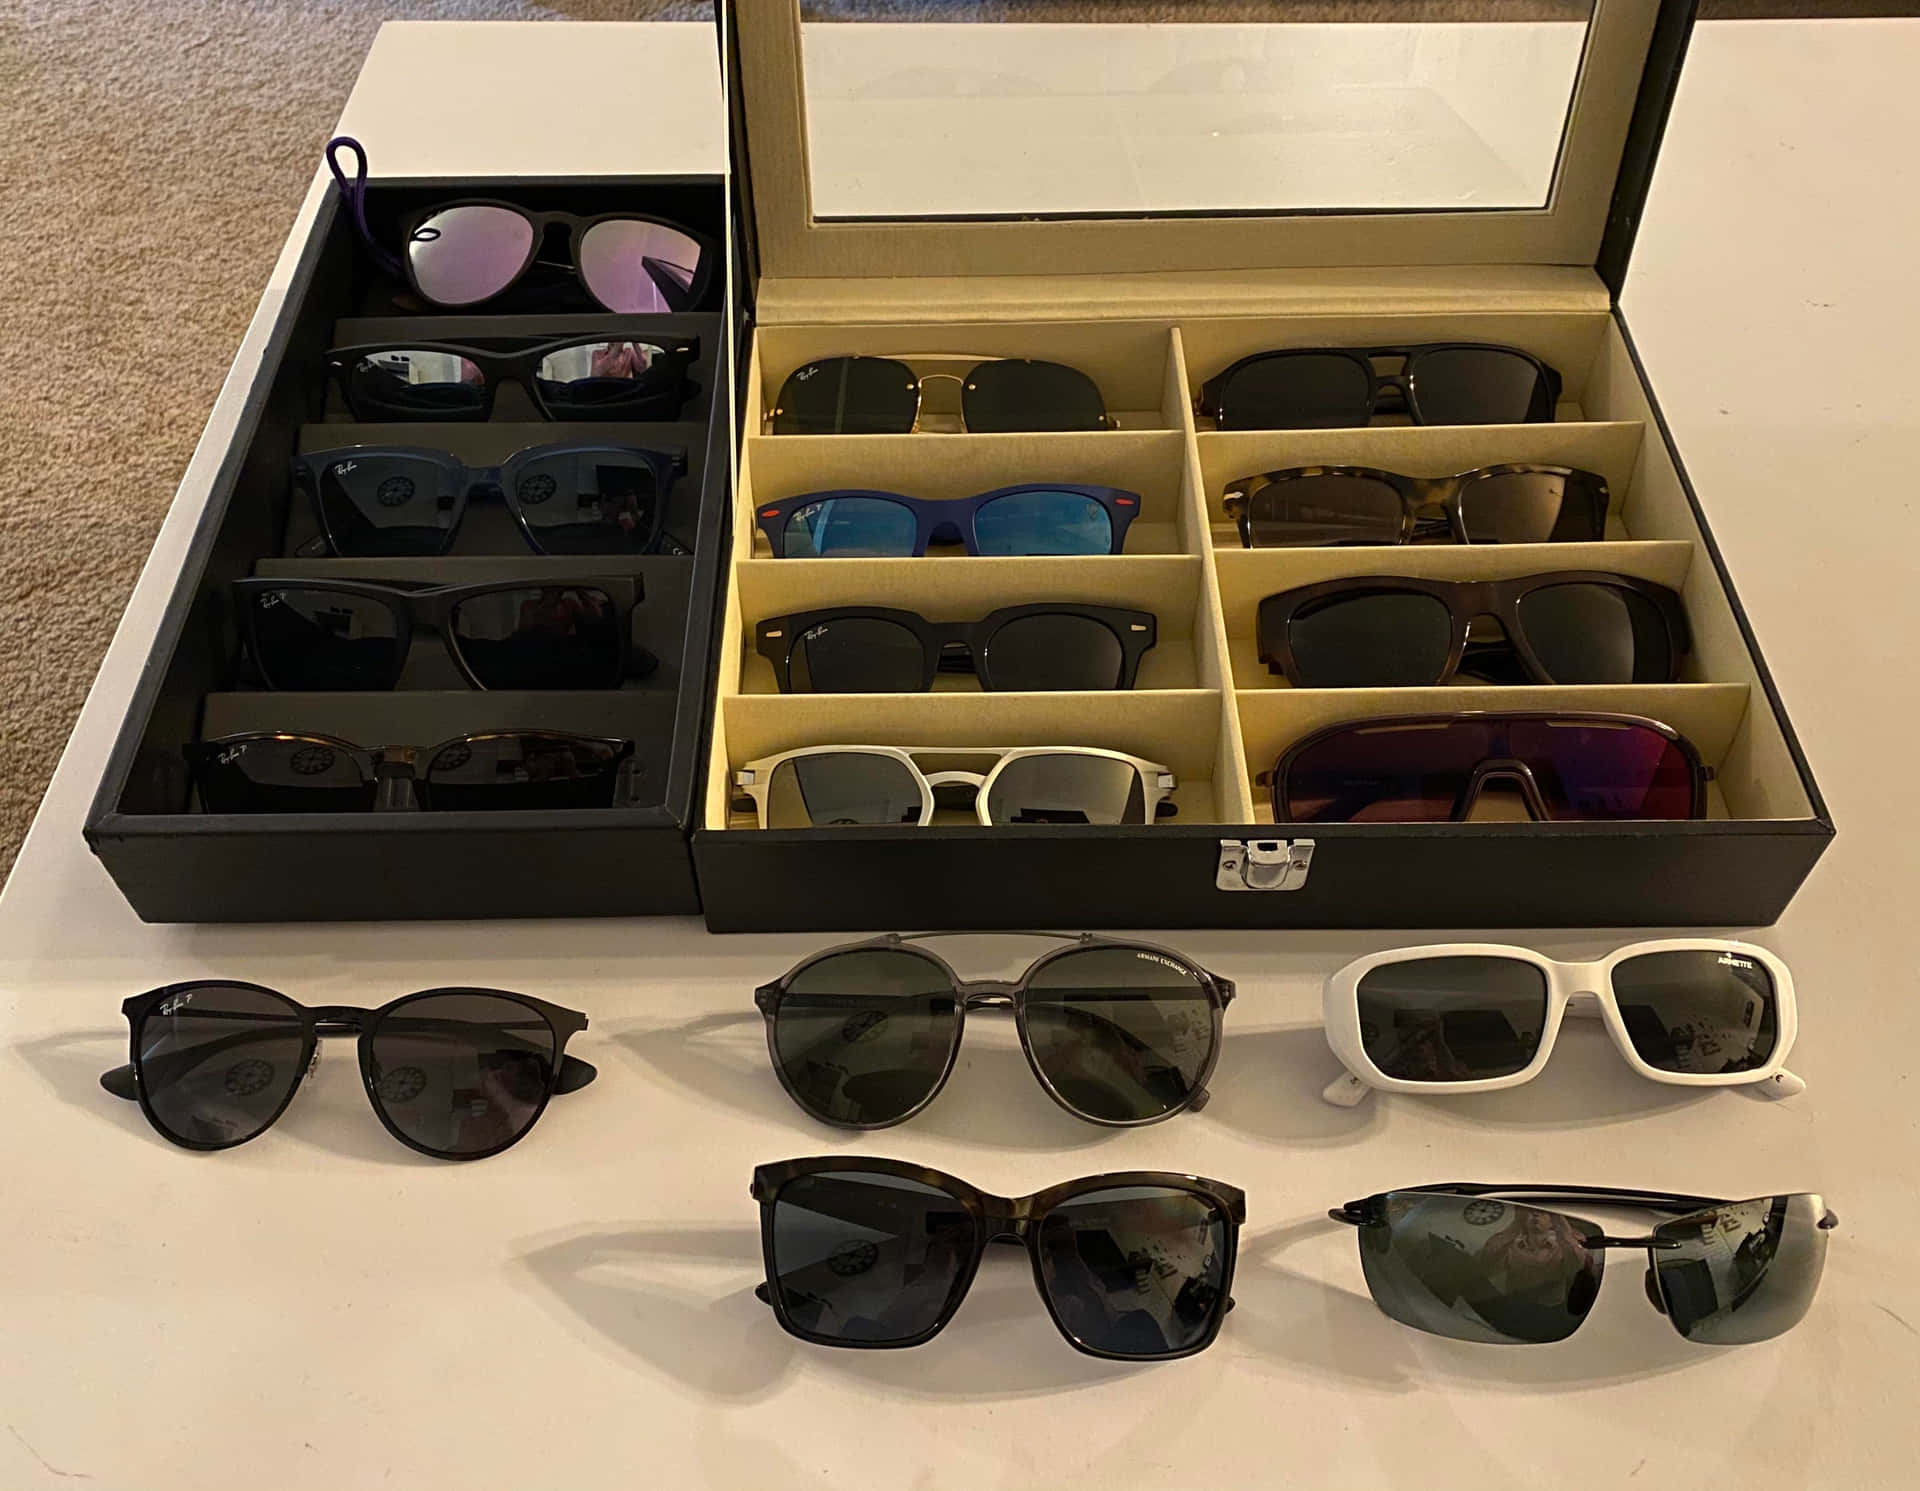 A Box Of Sunglasses With Different Styles Of Sunglasses